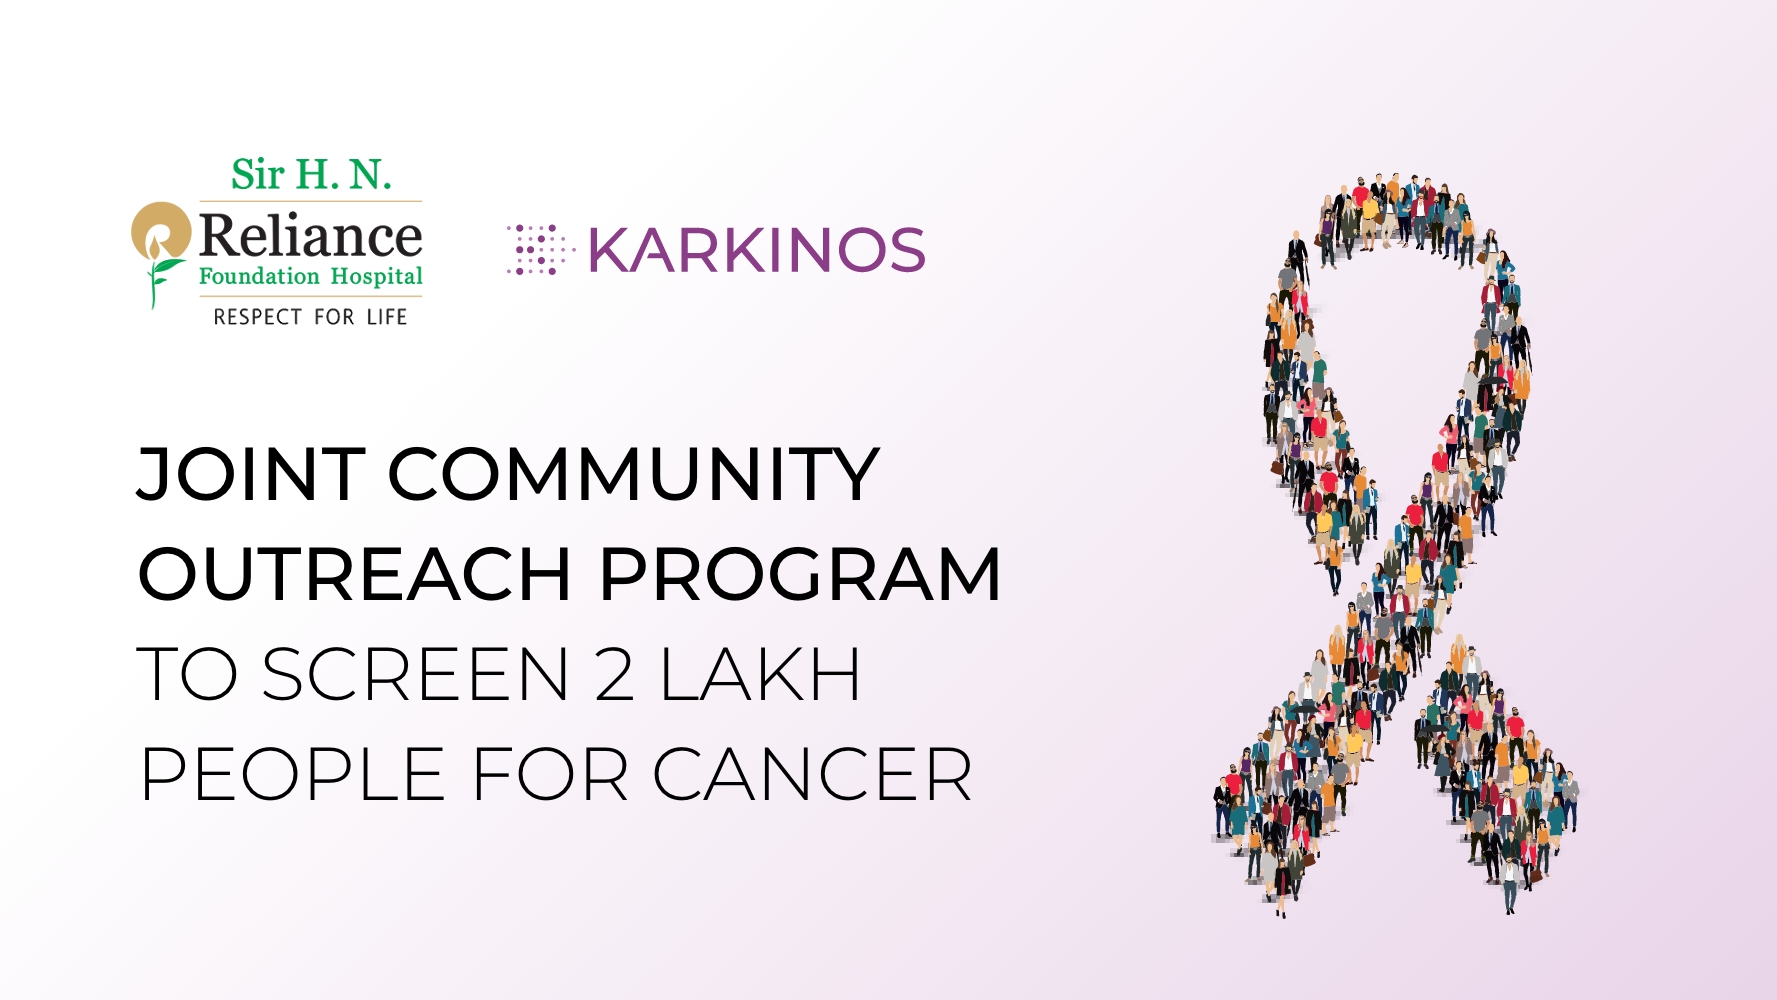 Sir HN Reliance Foundation Hospital partners with Karkinos Healthcare for a Community Cancer Screening Initiative